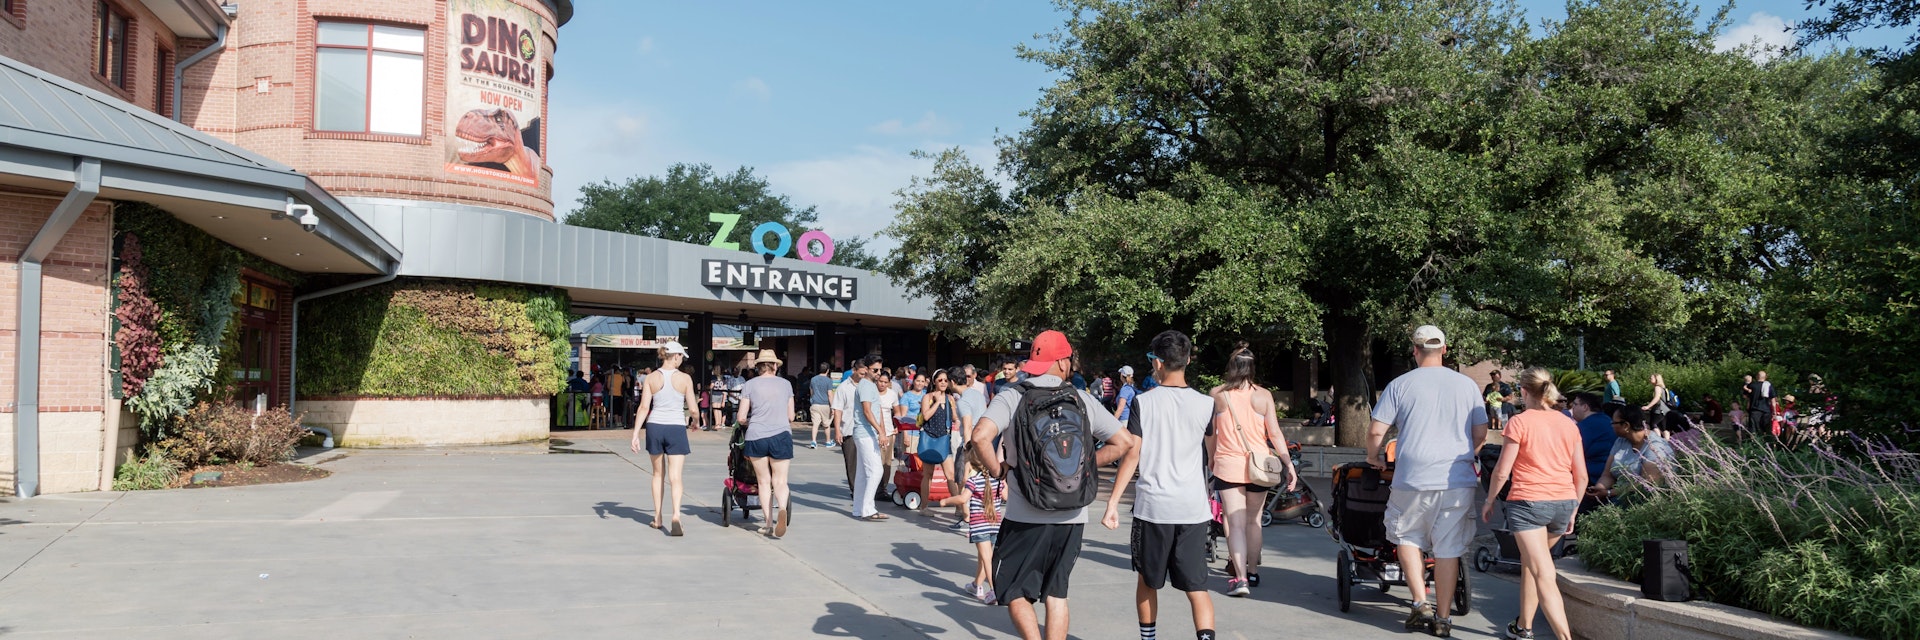 HOUSTON, US-JUN 25, 2016: Visitors entering the Houston Zoo, a 55-acre zoological park located in Hermann Park, Houston, Texas. It houses over 6,000 animals, and receives 1.8 million visitors per year